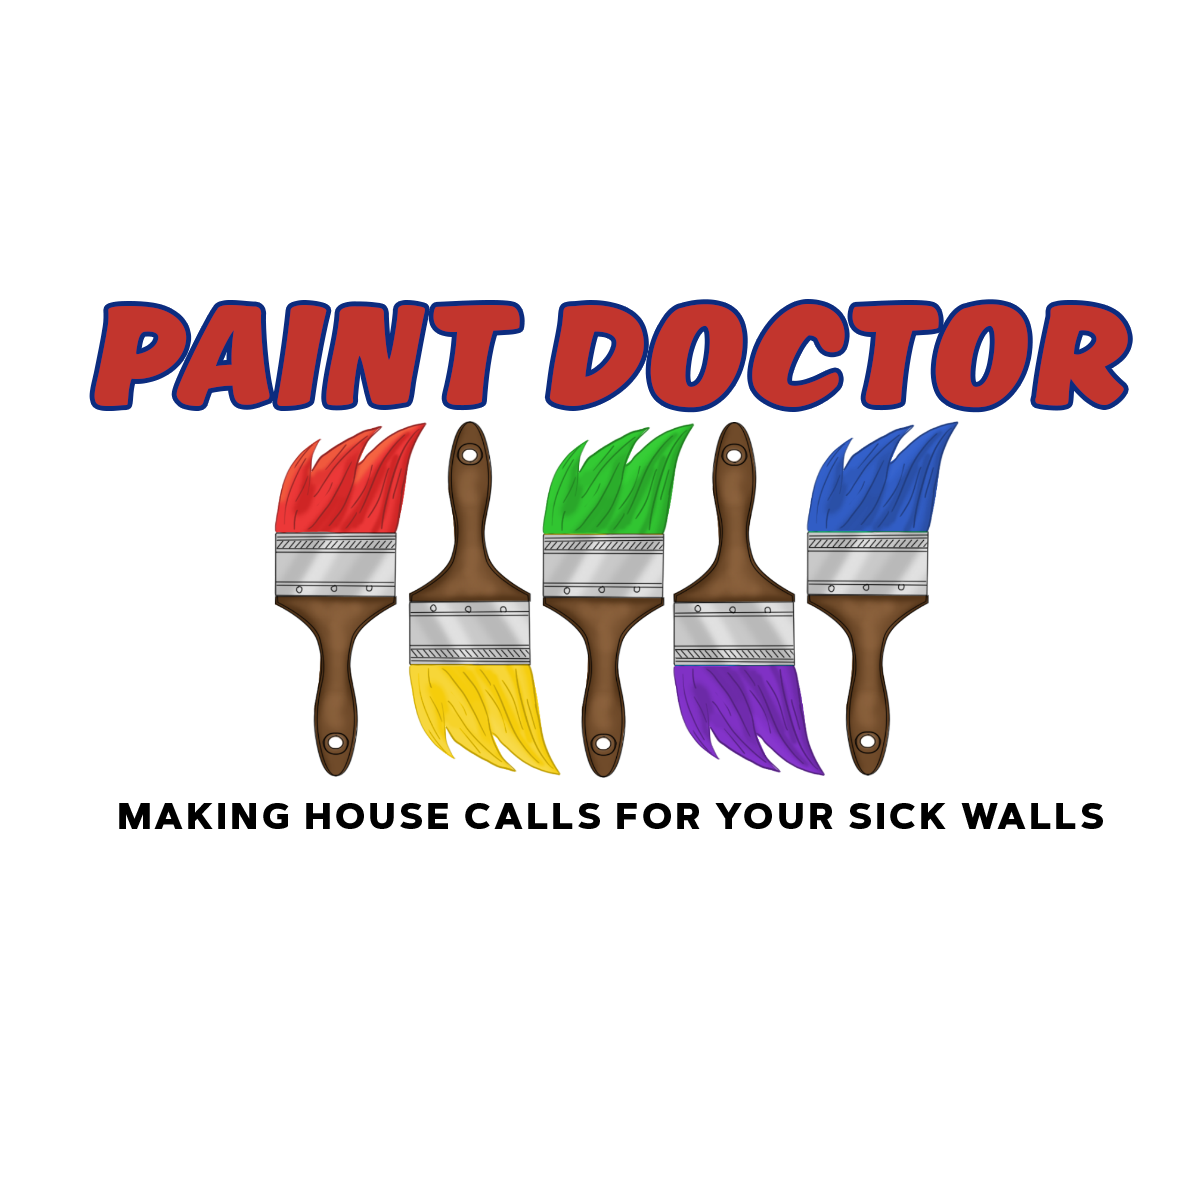 Paint Doctor: Over Two Decades of Premier Painting Services in Delaware